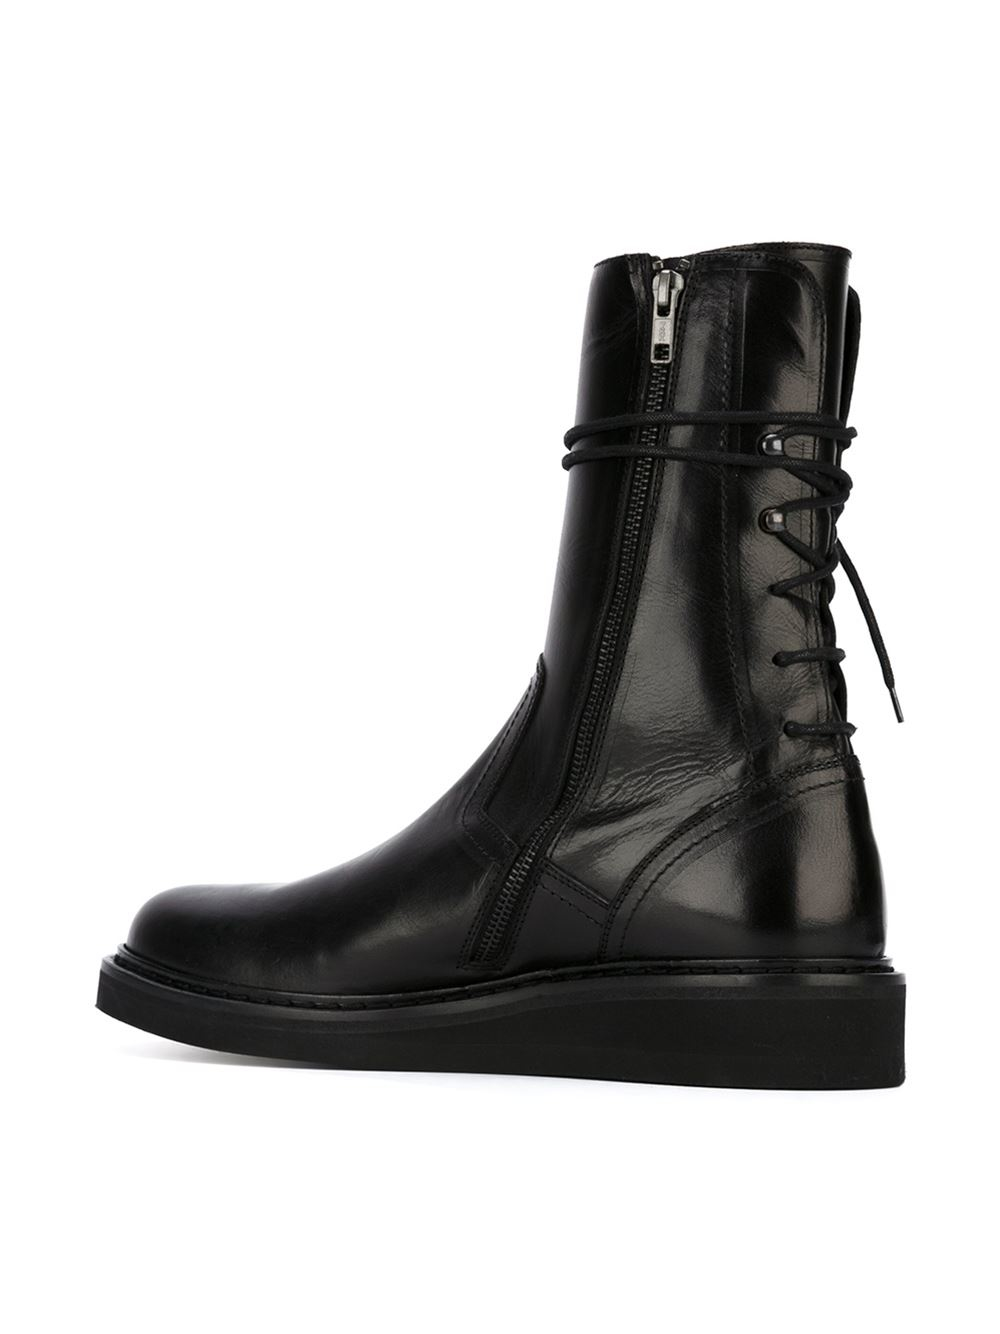 Ann Demeulemeester Leather Lace-up Boots in Black for Men - Lyst